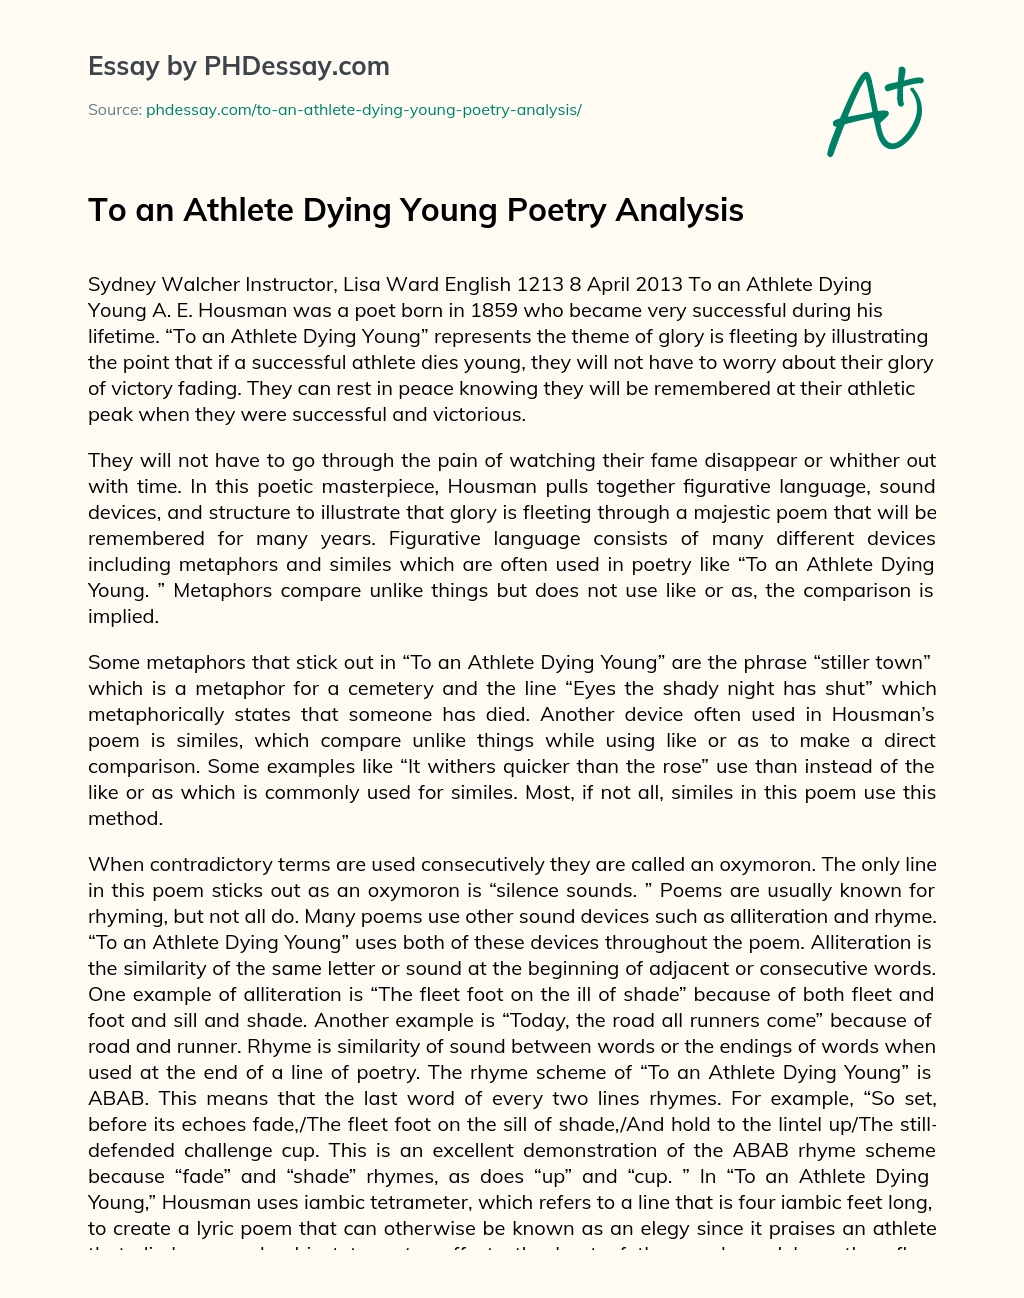 To an Athlete Dying Young Poetry Analysis essay